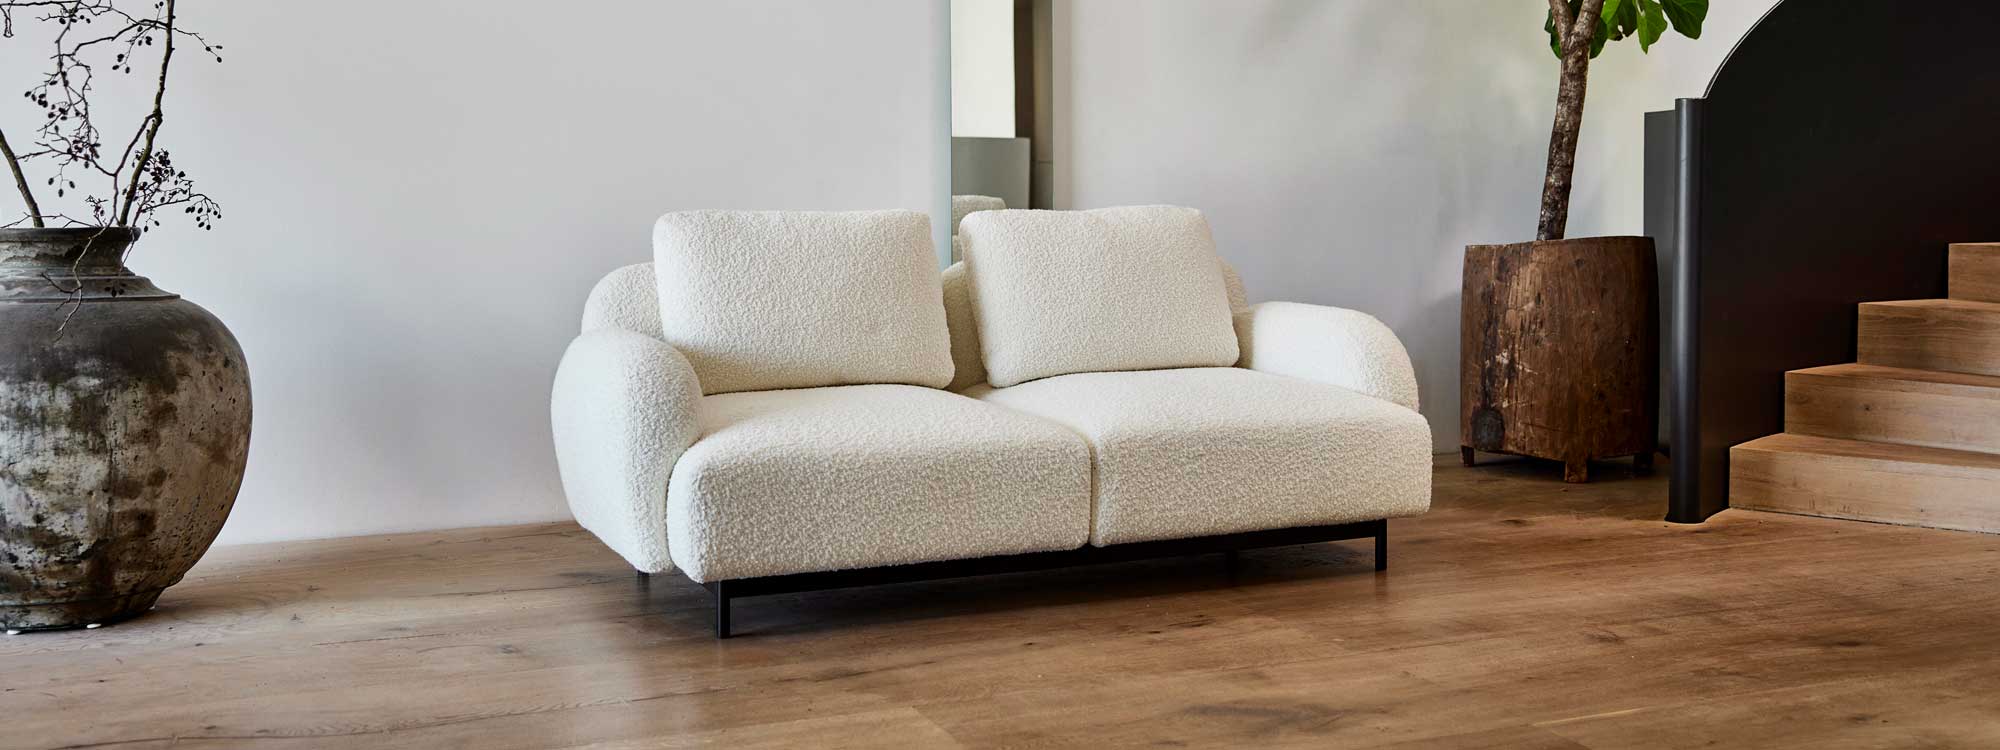 Image of Aura modern 2 seat sofa in White Scent fabric by Cane-line